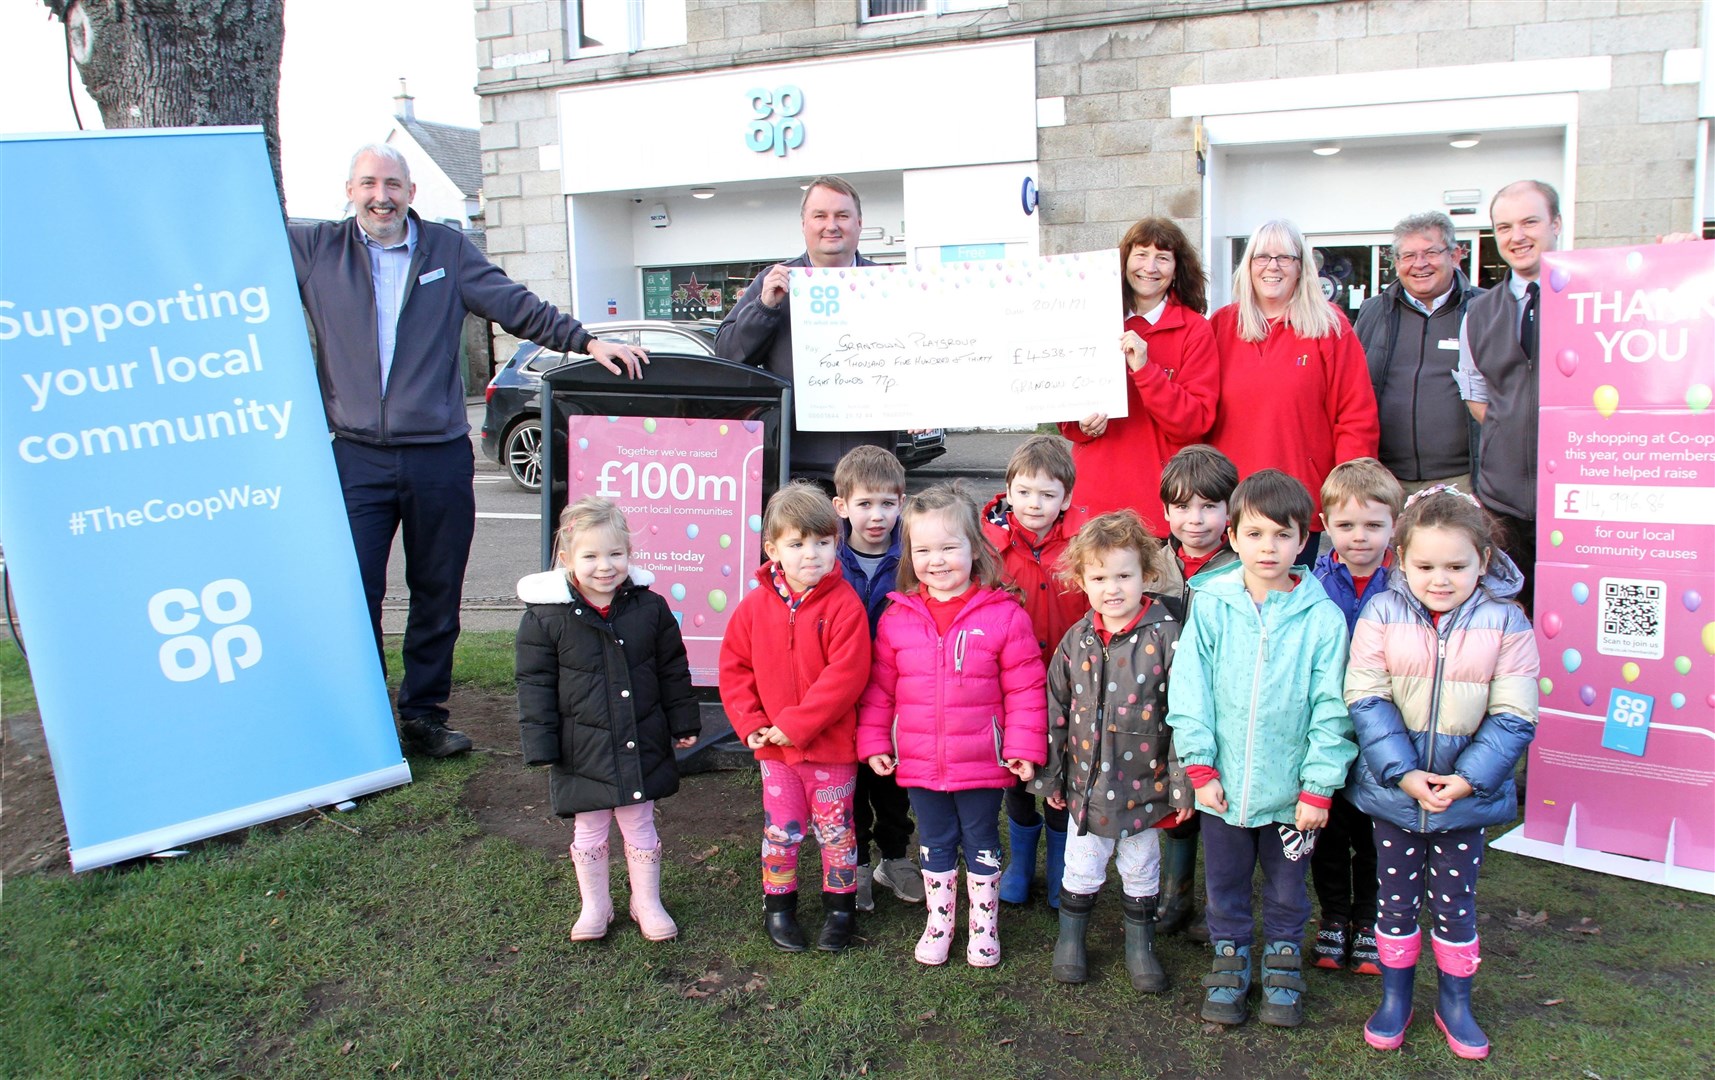 LOTS OF HAPPY FACES: Nicki Watkins, Audrey Fraser and the children from Grantown playgroup accept their cheque from the Co-op team.